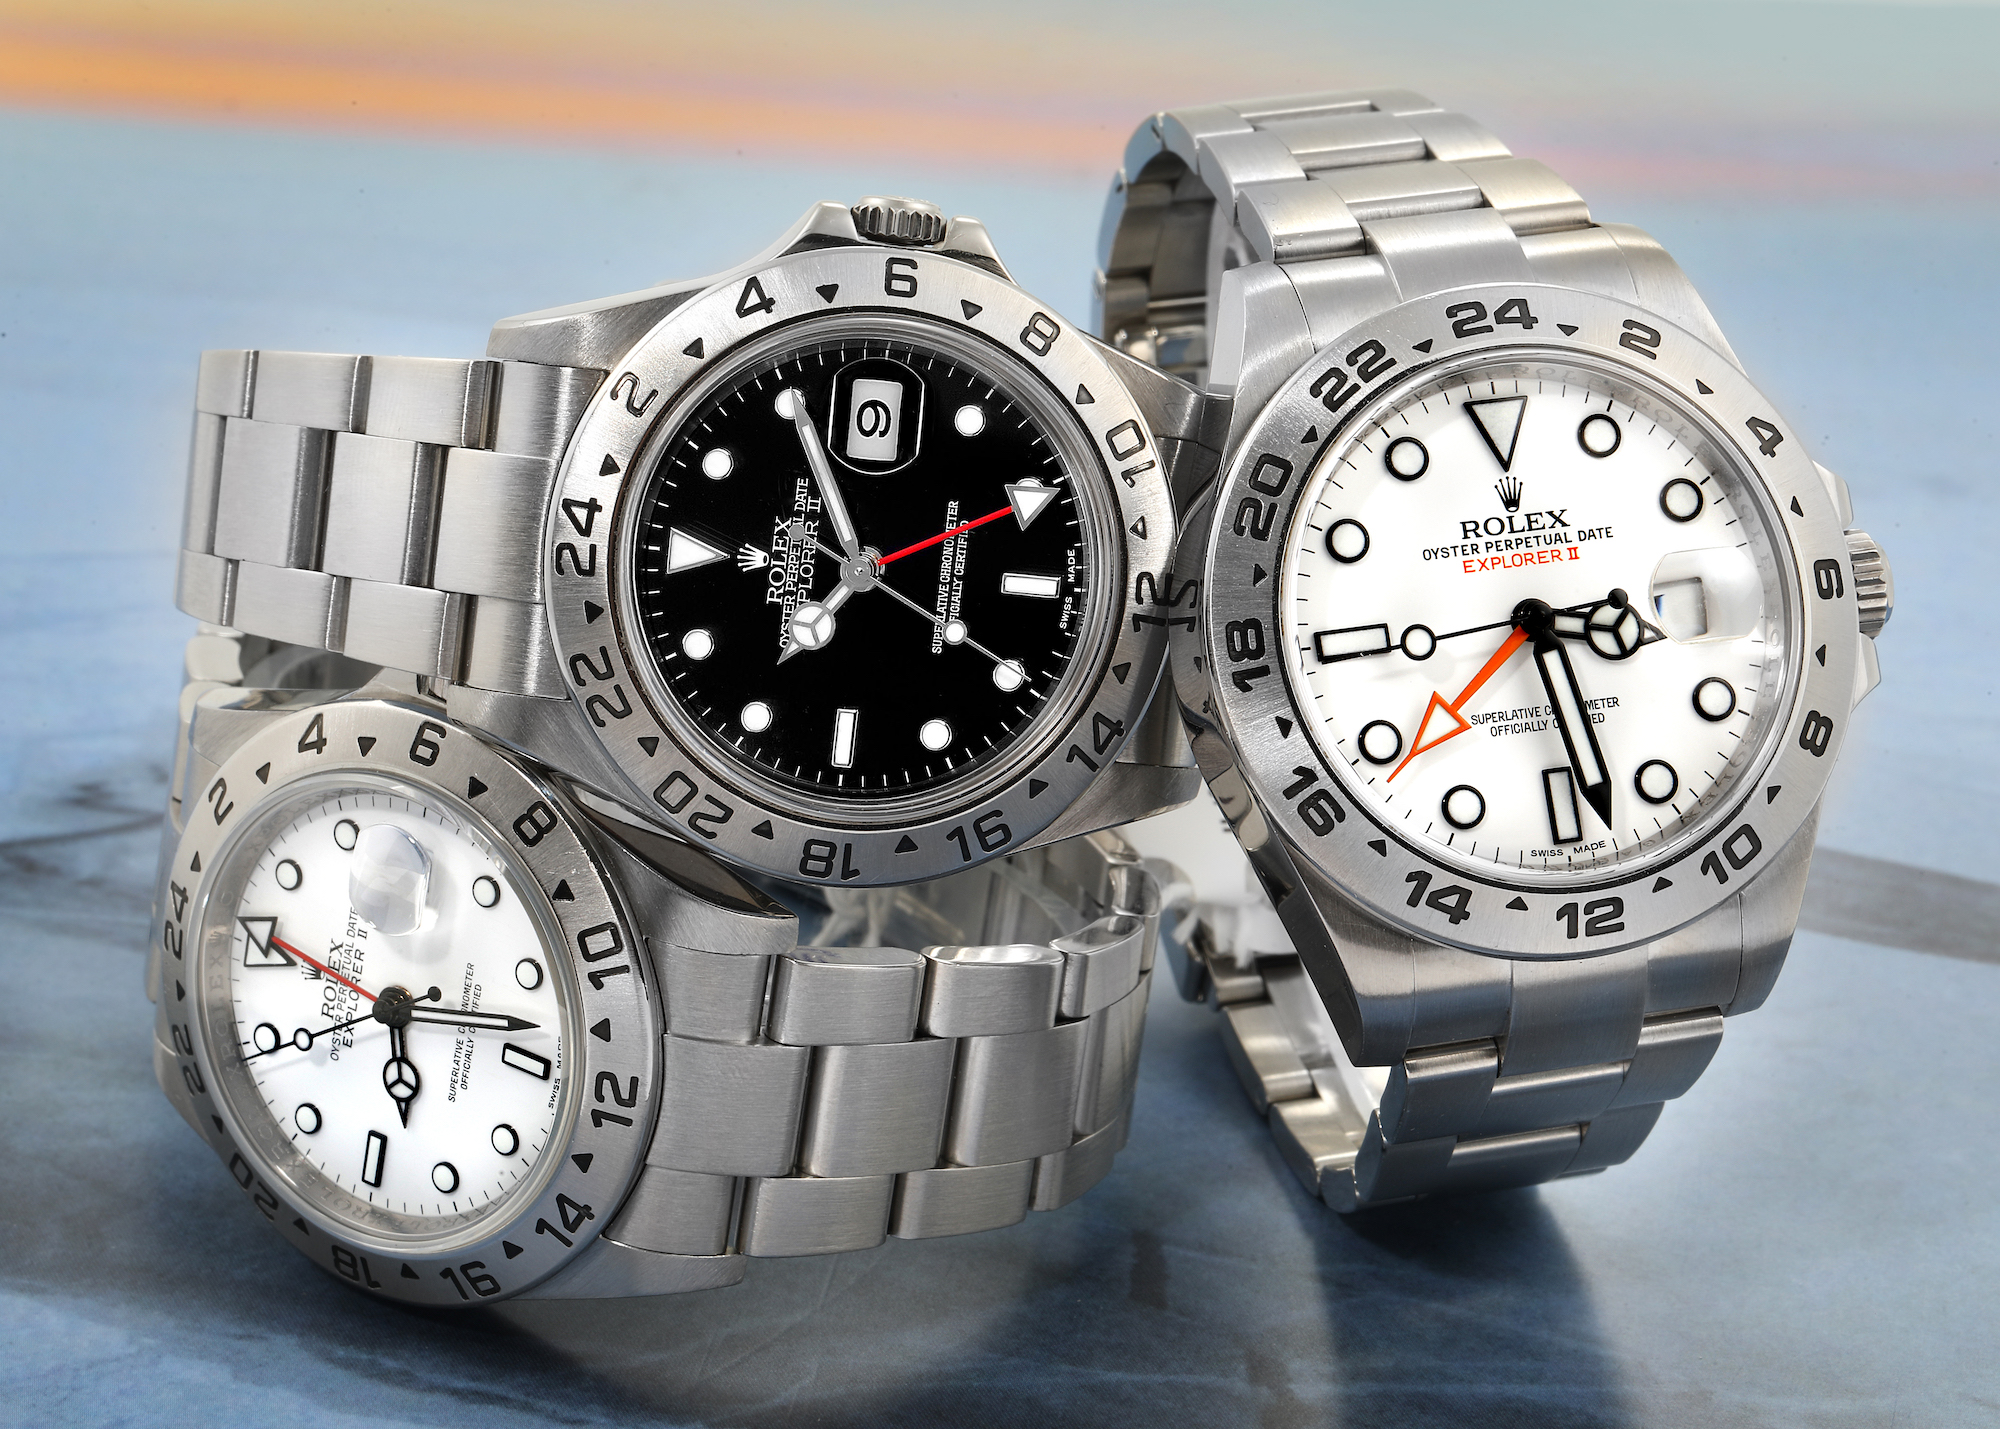 Rolex Explorer II White and Black Dial Watches